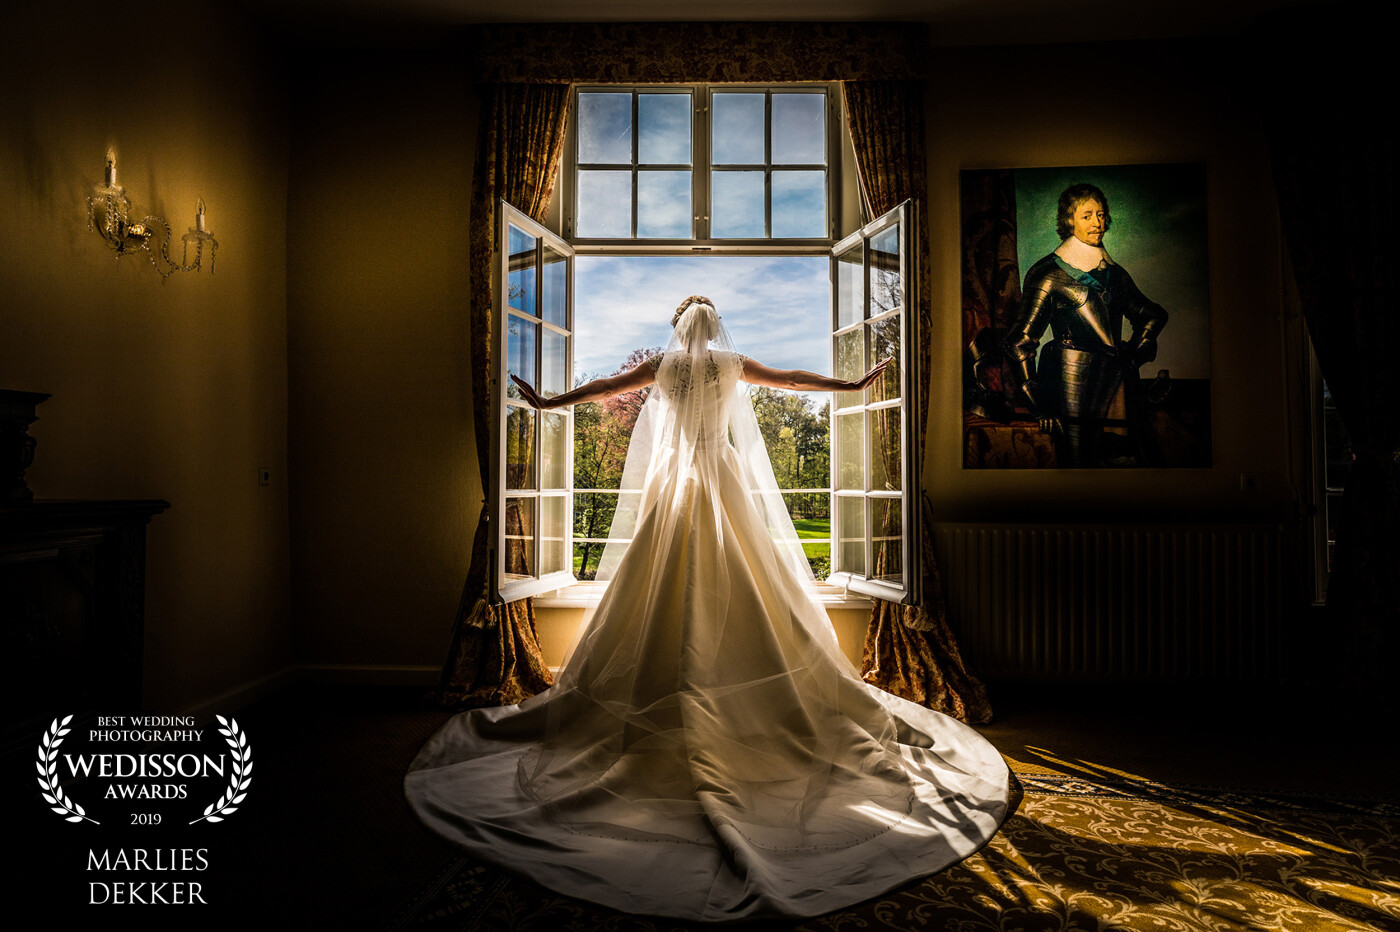 Just before the groom came in, she opened the window to check out where mister groom was outside at that moment...<br />
the light on the painting was perfect. It was like the guy on the painting was watching what was happening at that moment...  It took me just one click to make the magic happen! What a lovely bride!